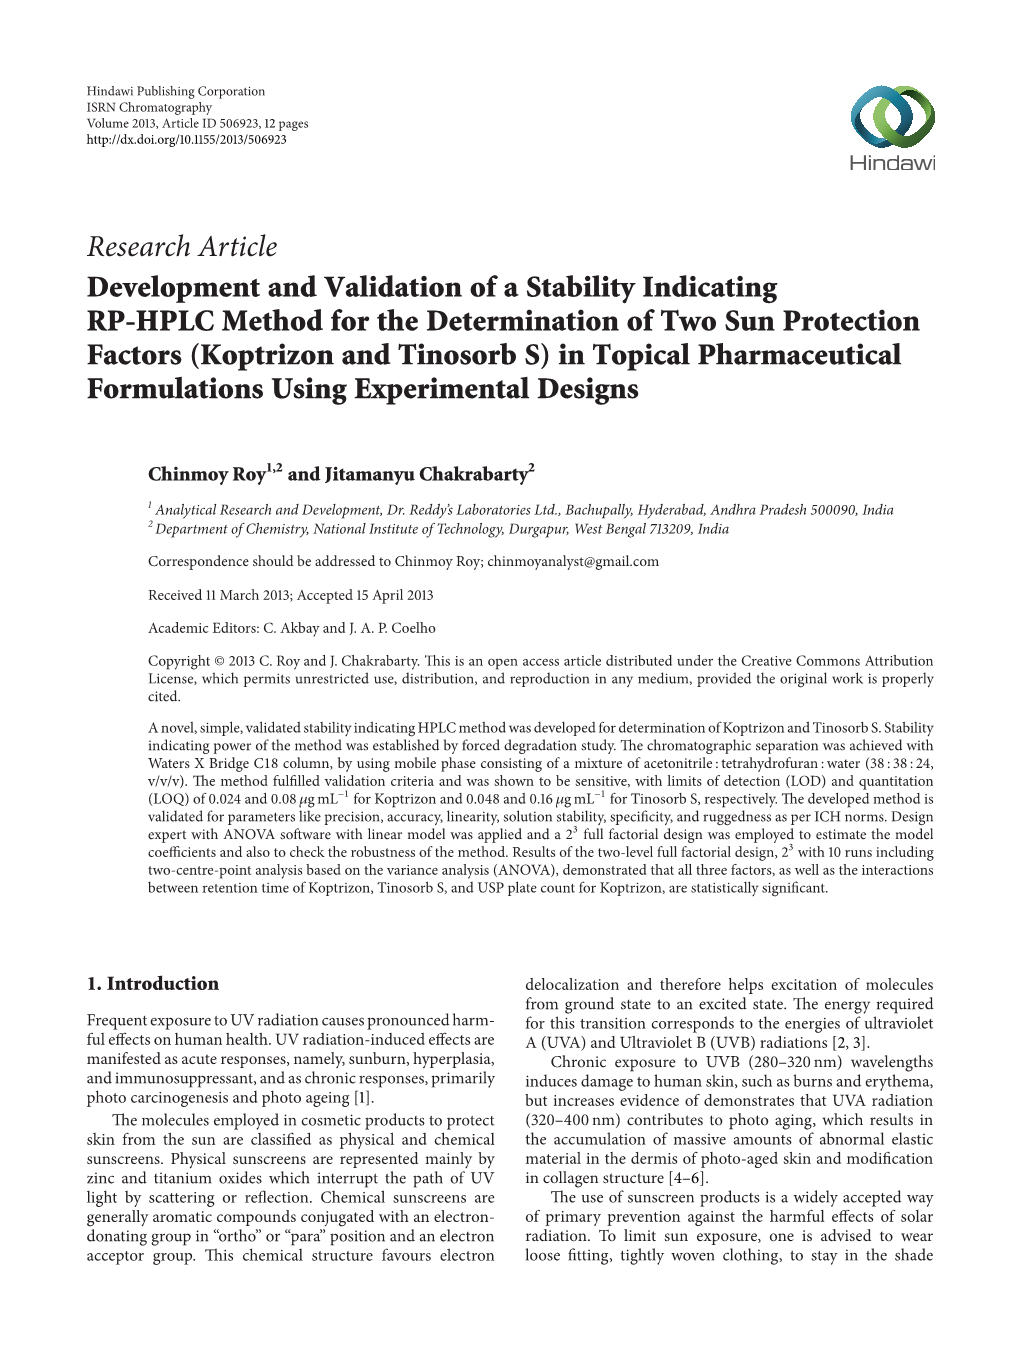 Development and Validation of a Stability Indicating RP-HPLC